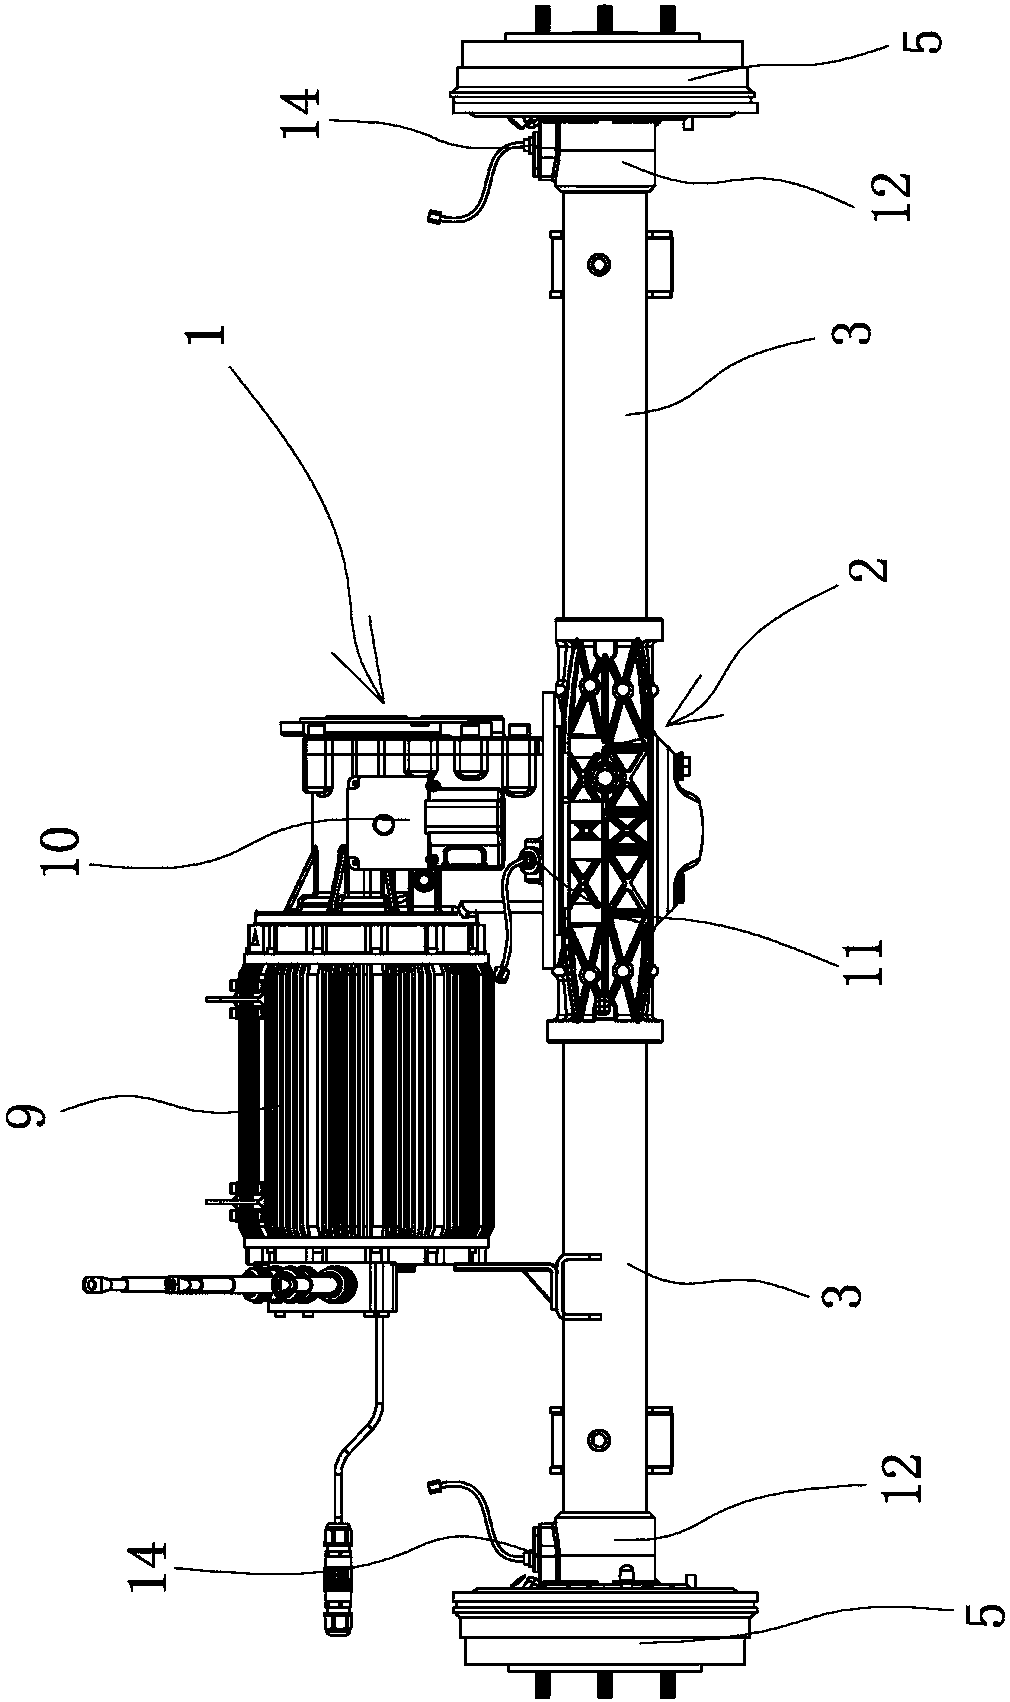 Rear axle assembly of electric automobile